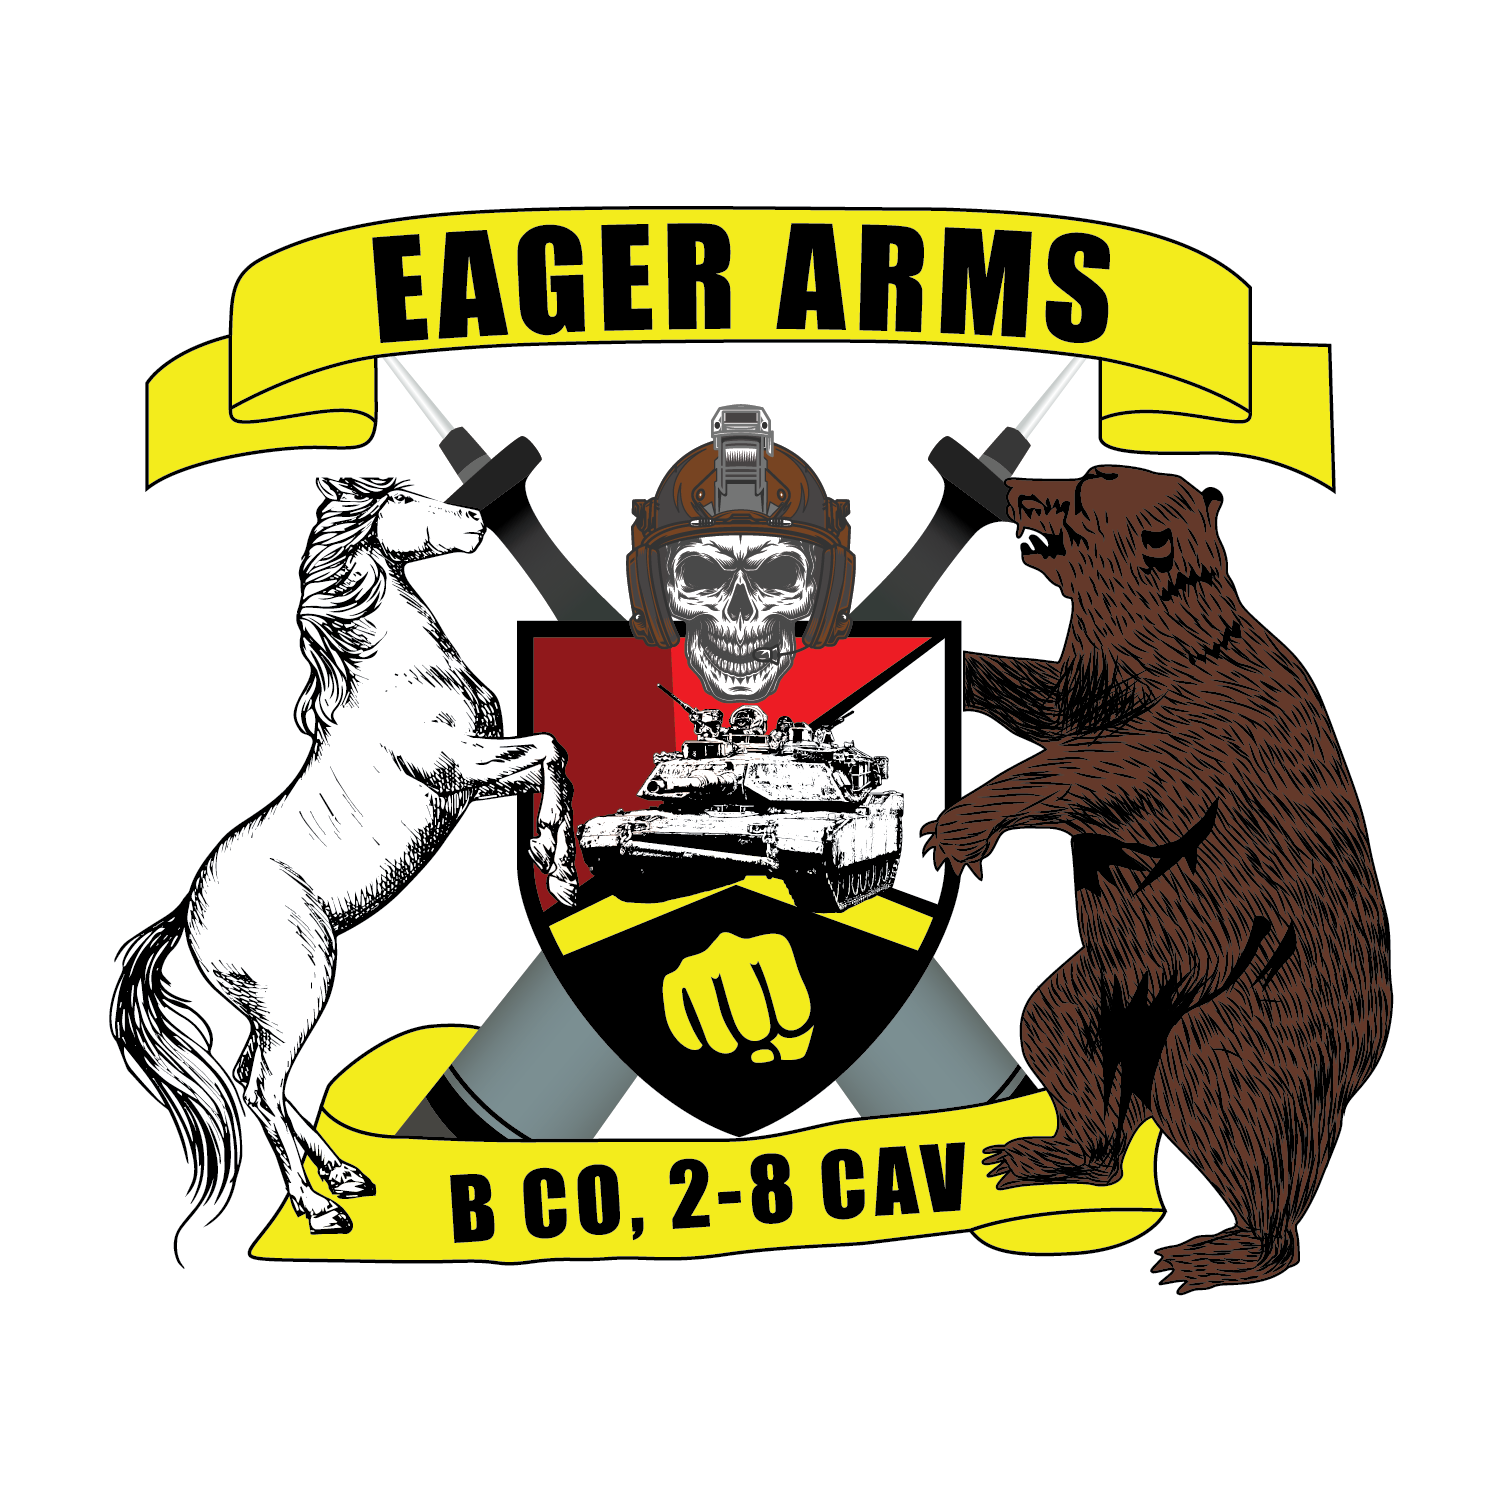 B Co, 2-8 CAV “Eager Arms”